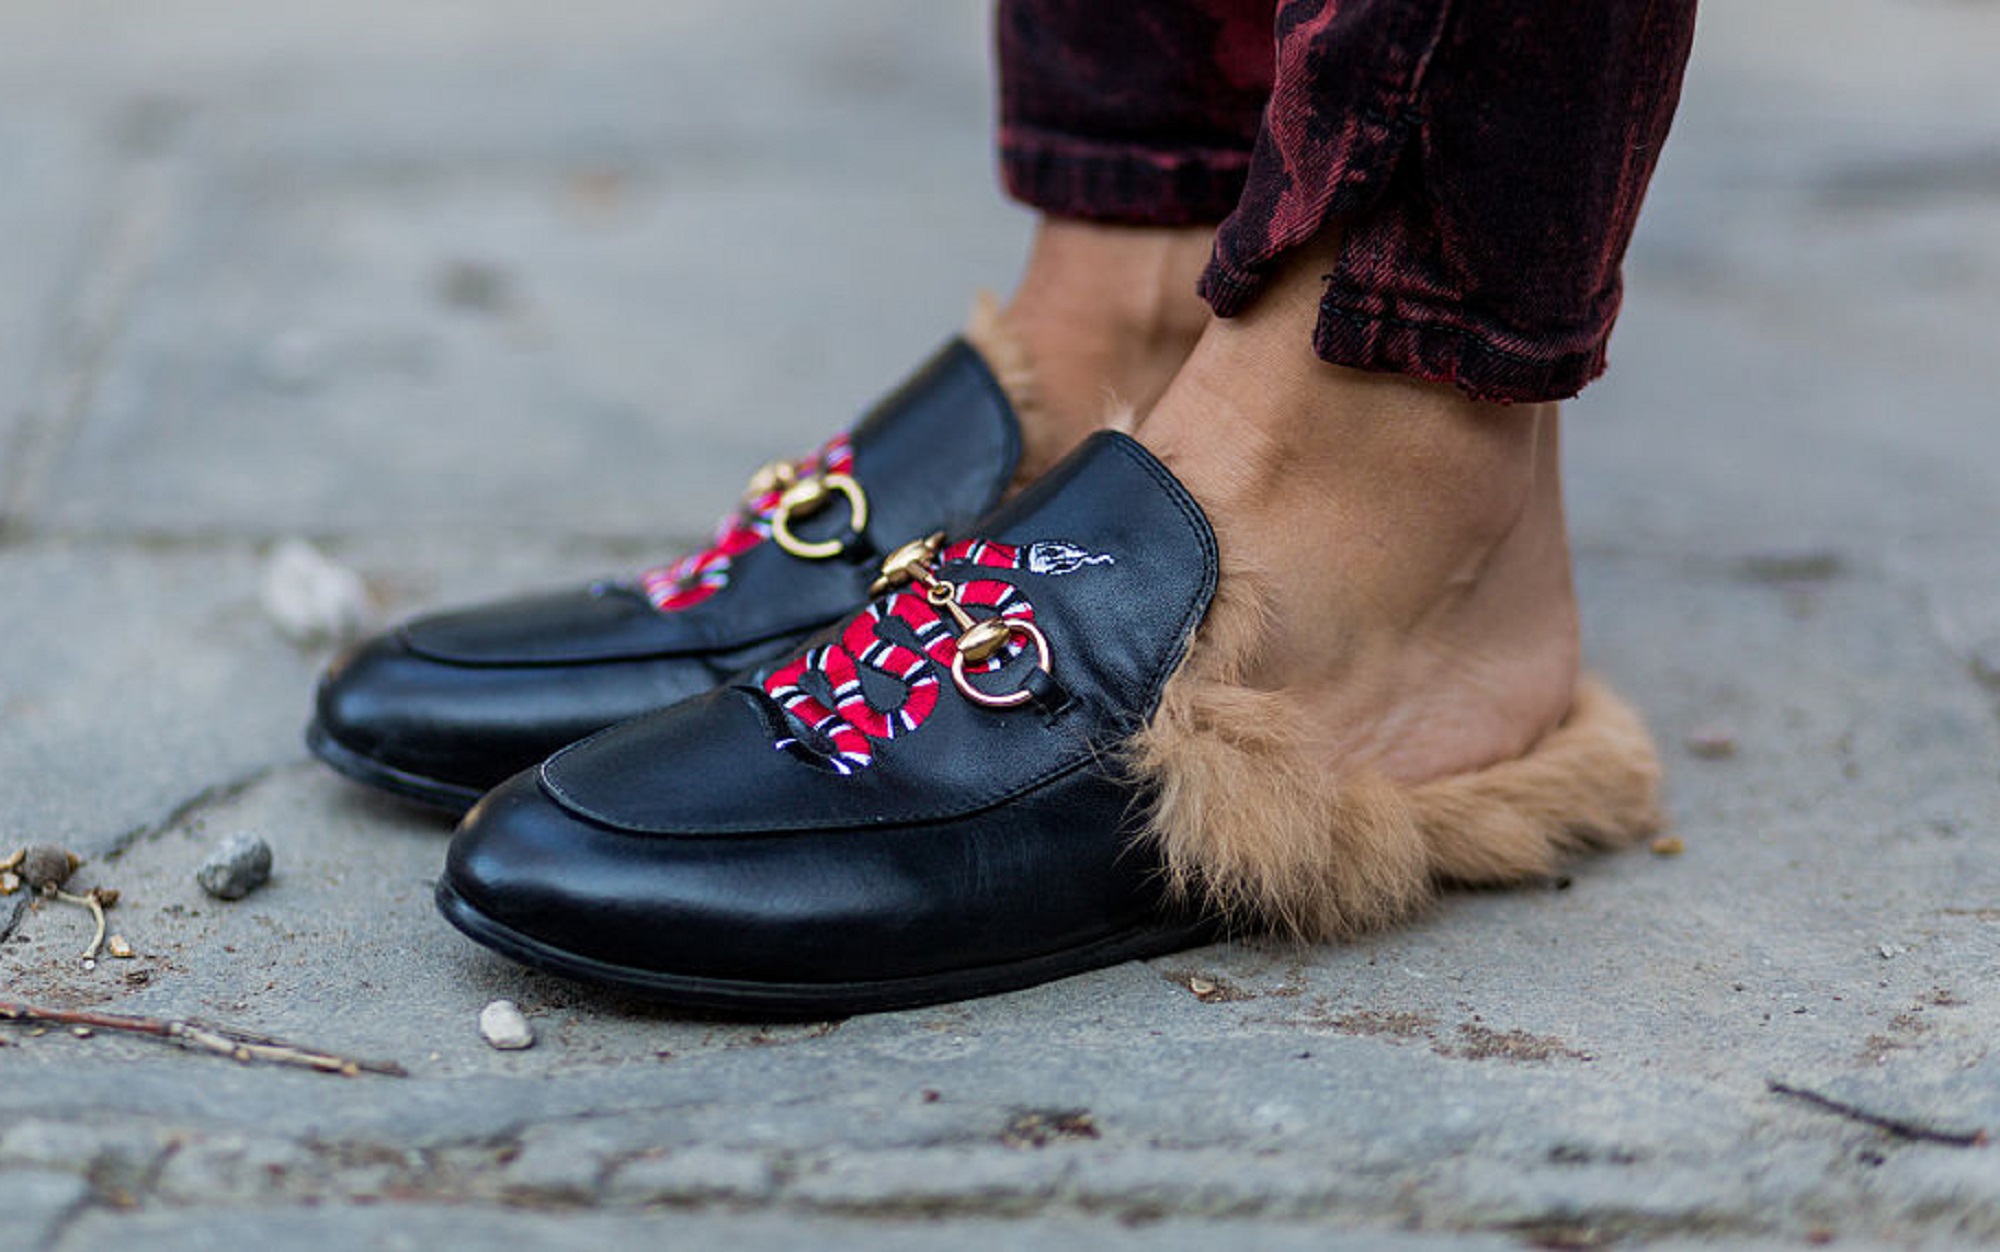 Gucci's Loafers Rule, But We Want to Know What's Next - Bloomberg